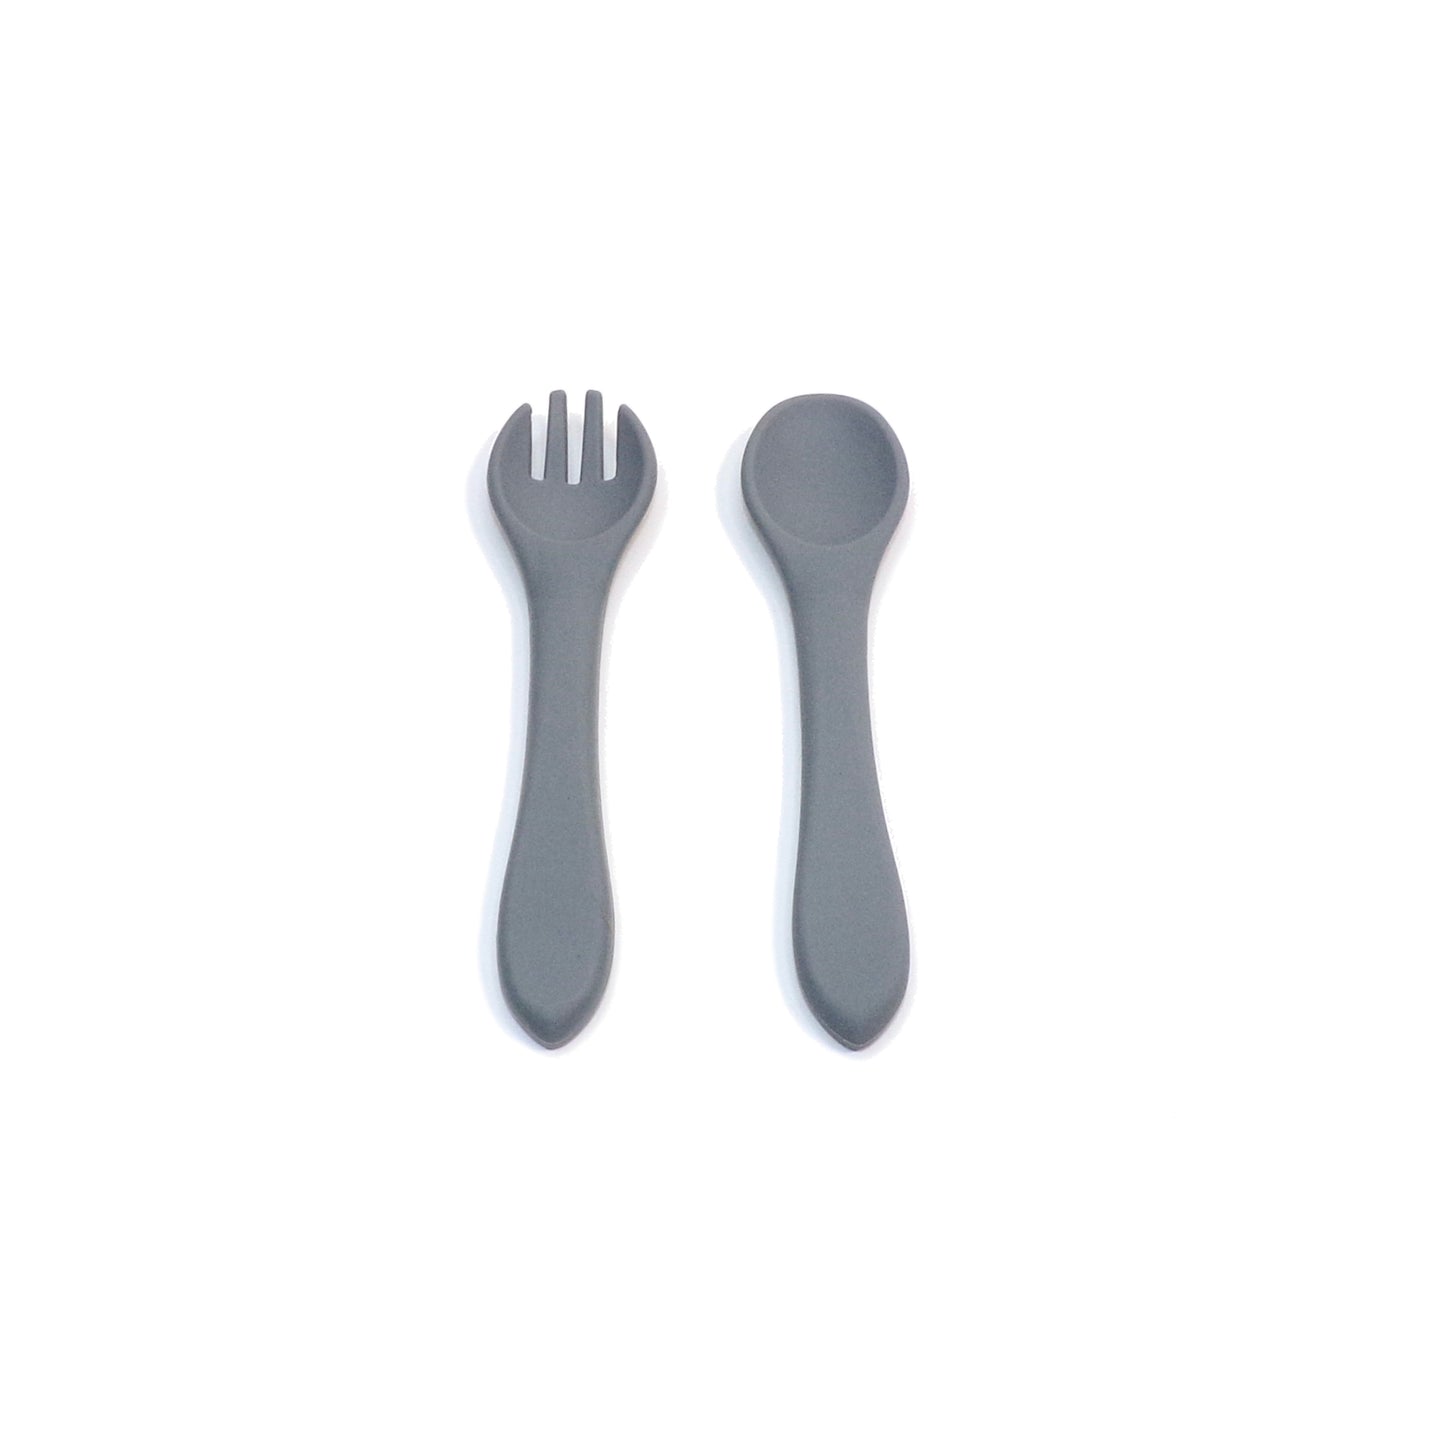 A set of blue silicone cutlery, a fork and spoon. The utensils are designed for young children.